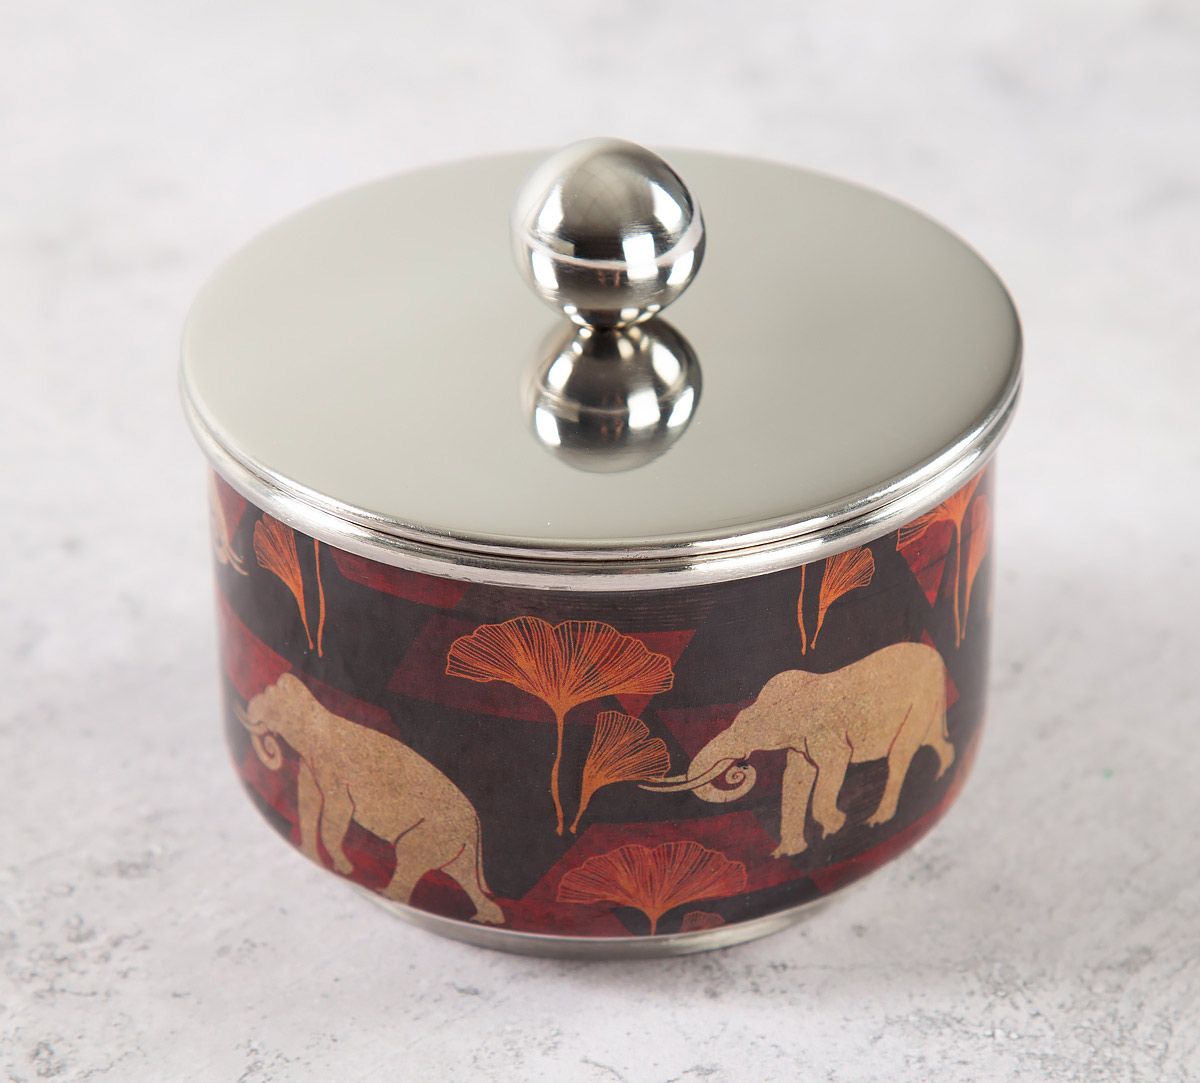 India Circus Gallant Tusker Steel Bowl with Lid